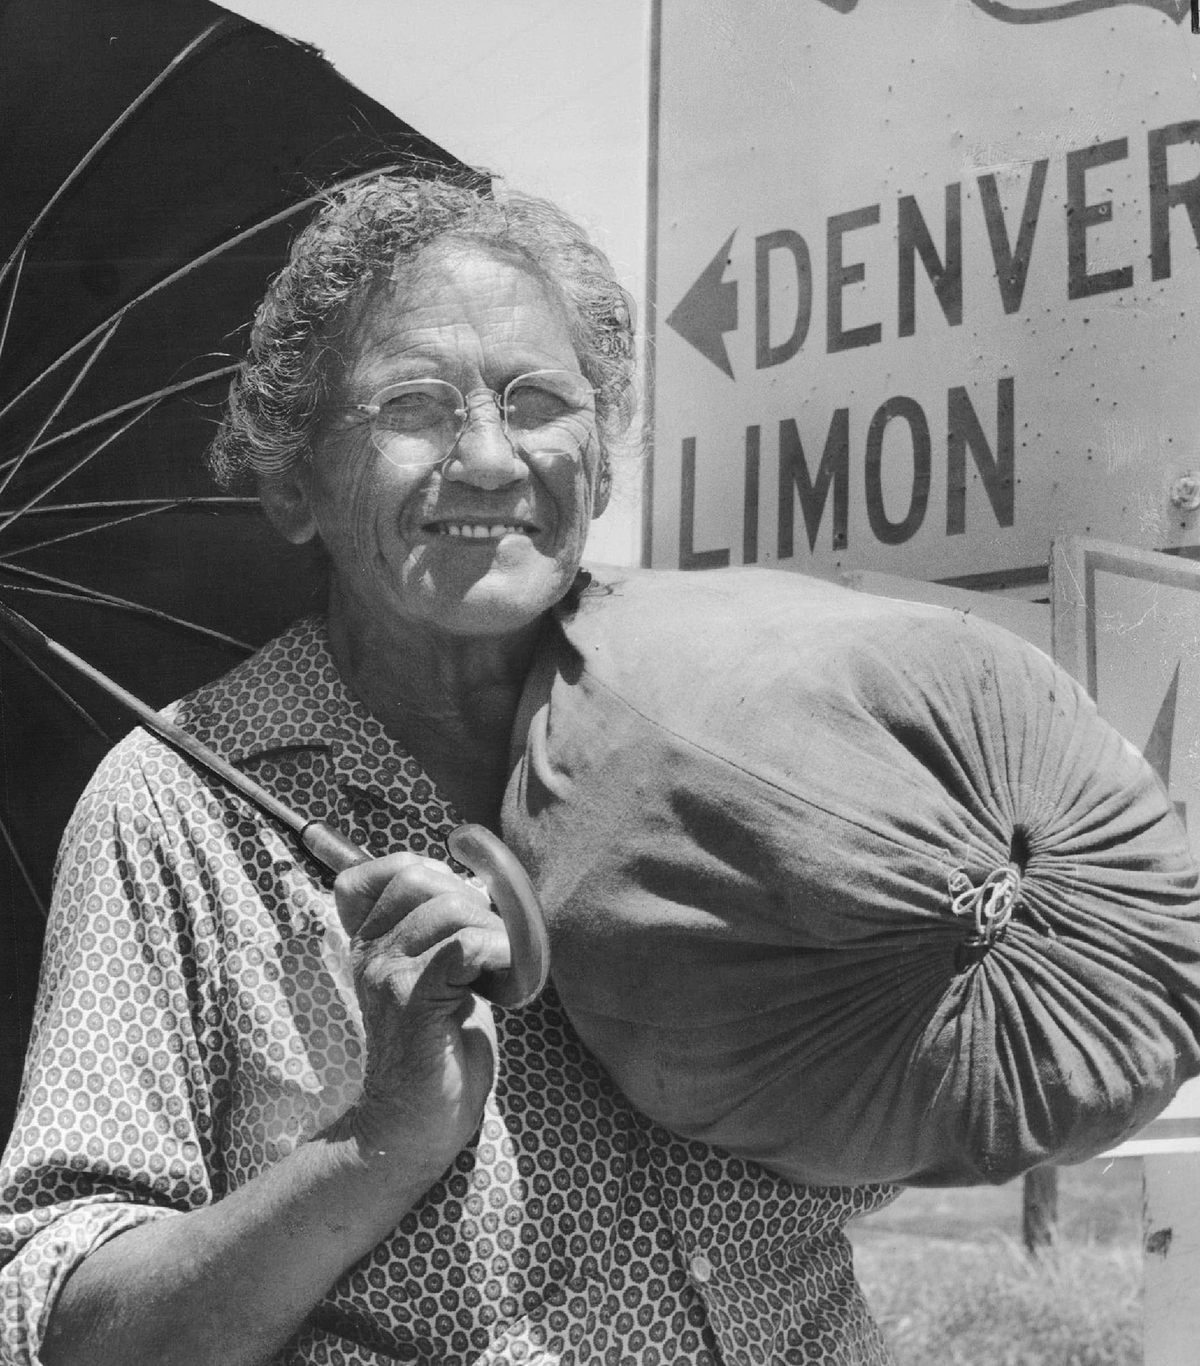 Gatewood, smiling, stands with her pack and an umbrella